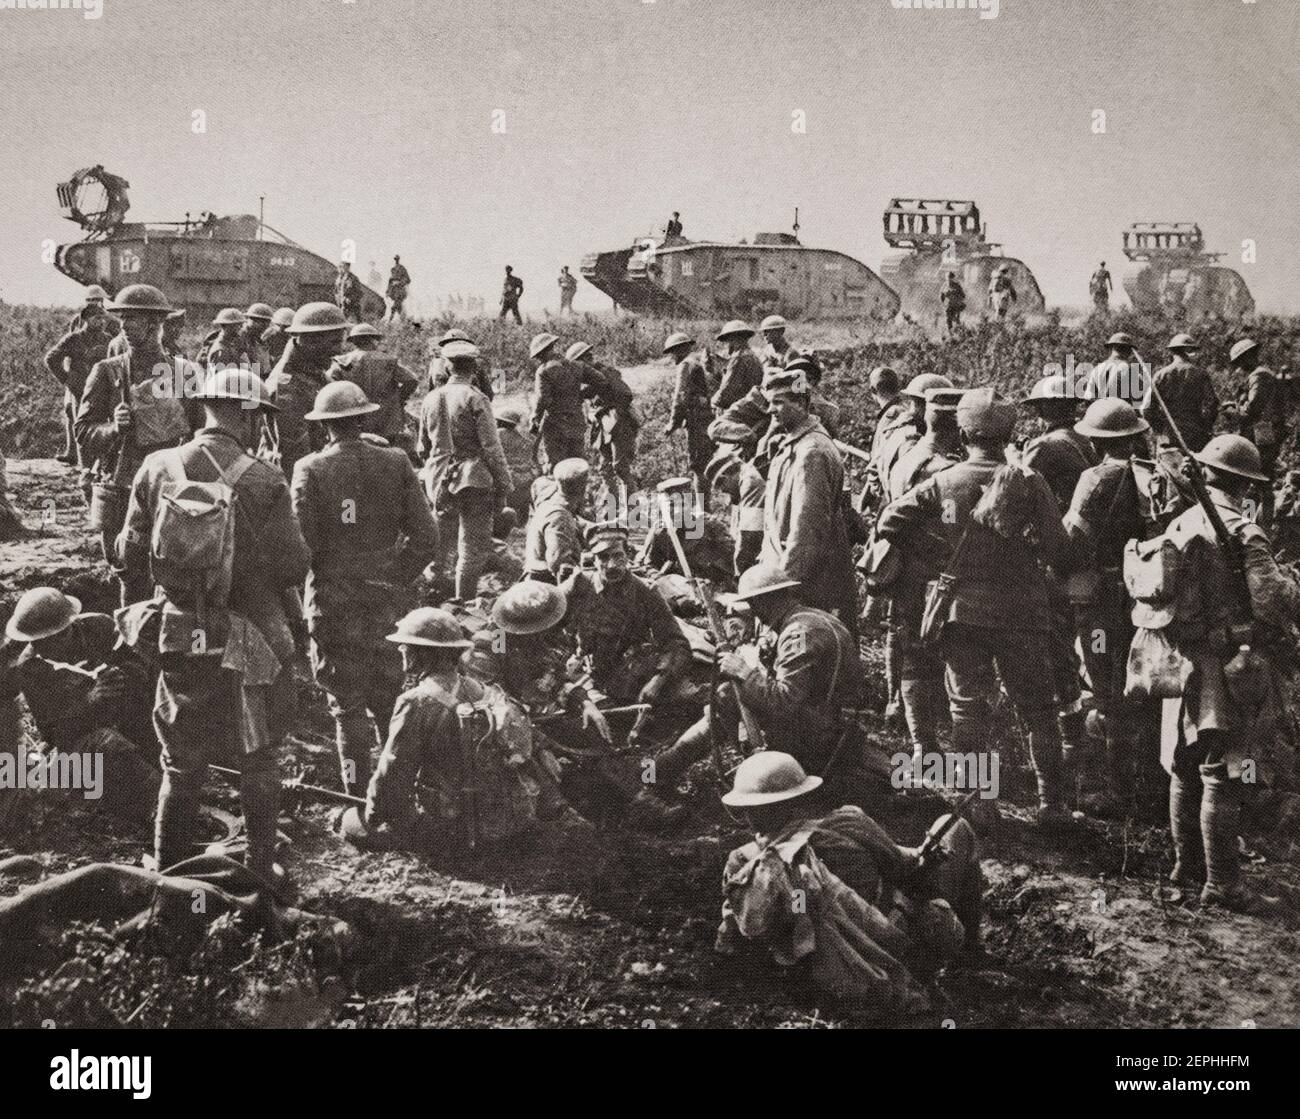 Men of the American 30th Division at rest with German prisoners following the capture of Bellicourt, 29 September 1918. In the background are British Mark V tanks (with 'cribs' for crossing trenches) of the 8th Battalion, Tank Corps, which was one of four battalions of the 5th Tank Brigade allotted to the 5th Australian Division and American Corps for the operation. Stock Photo